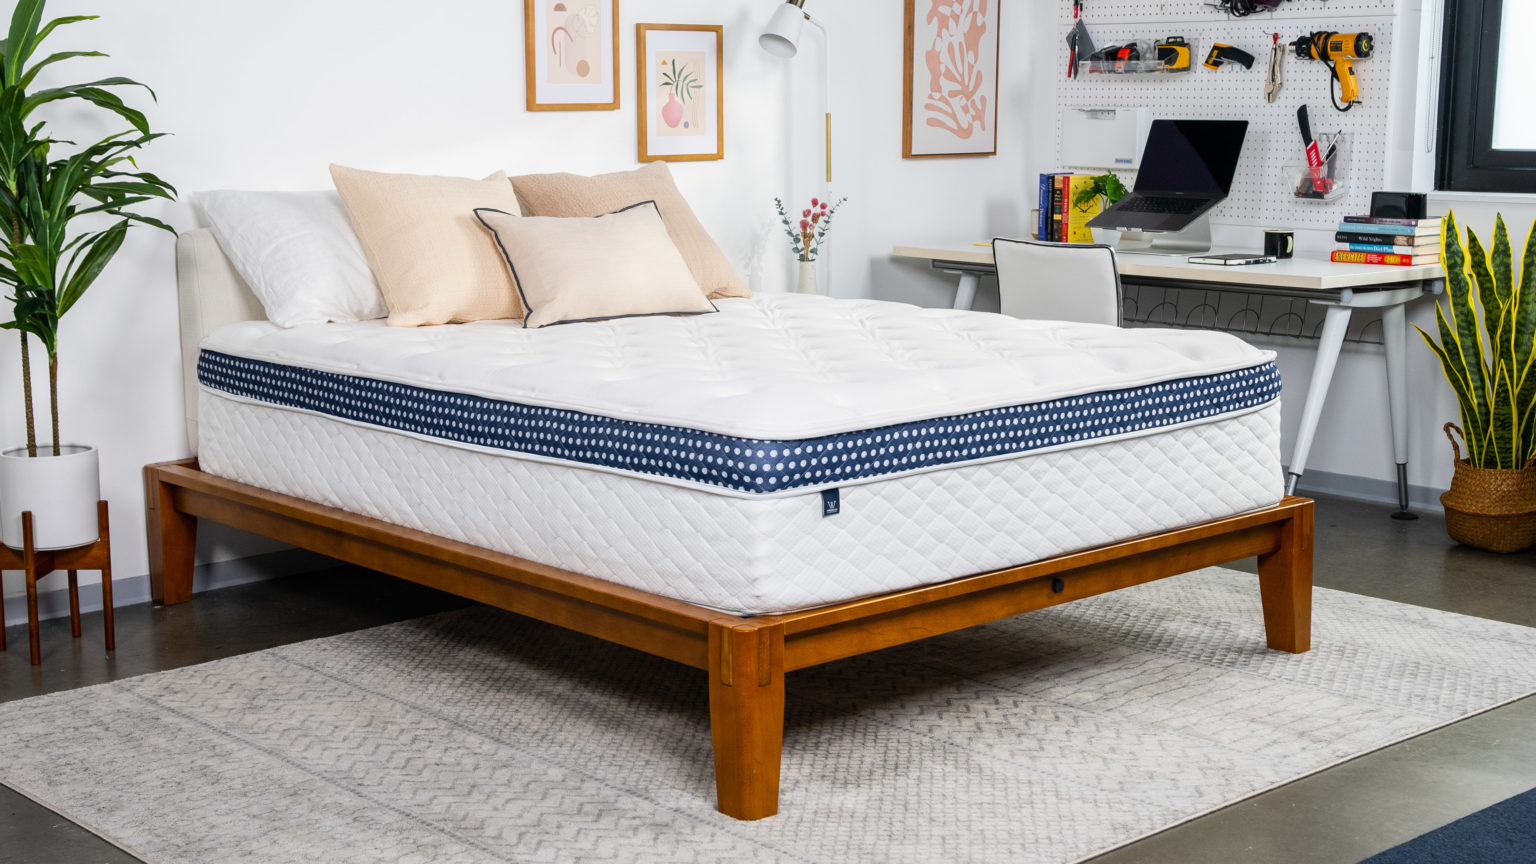 Factors That Affect How Long A Mattress Takes To Fully Expand